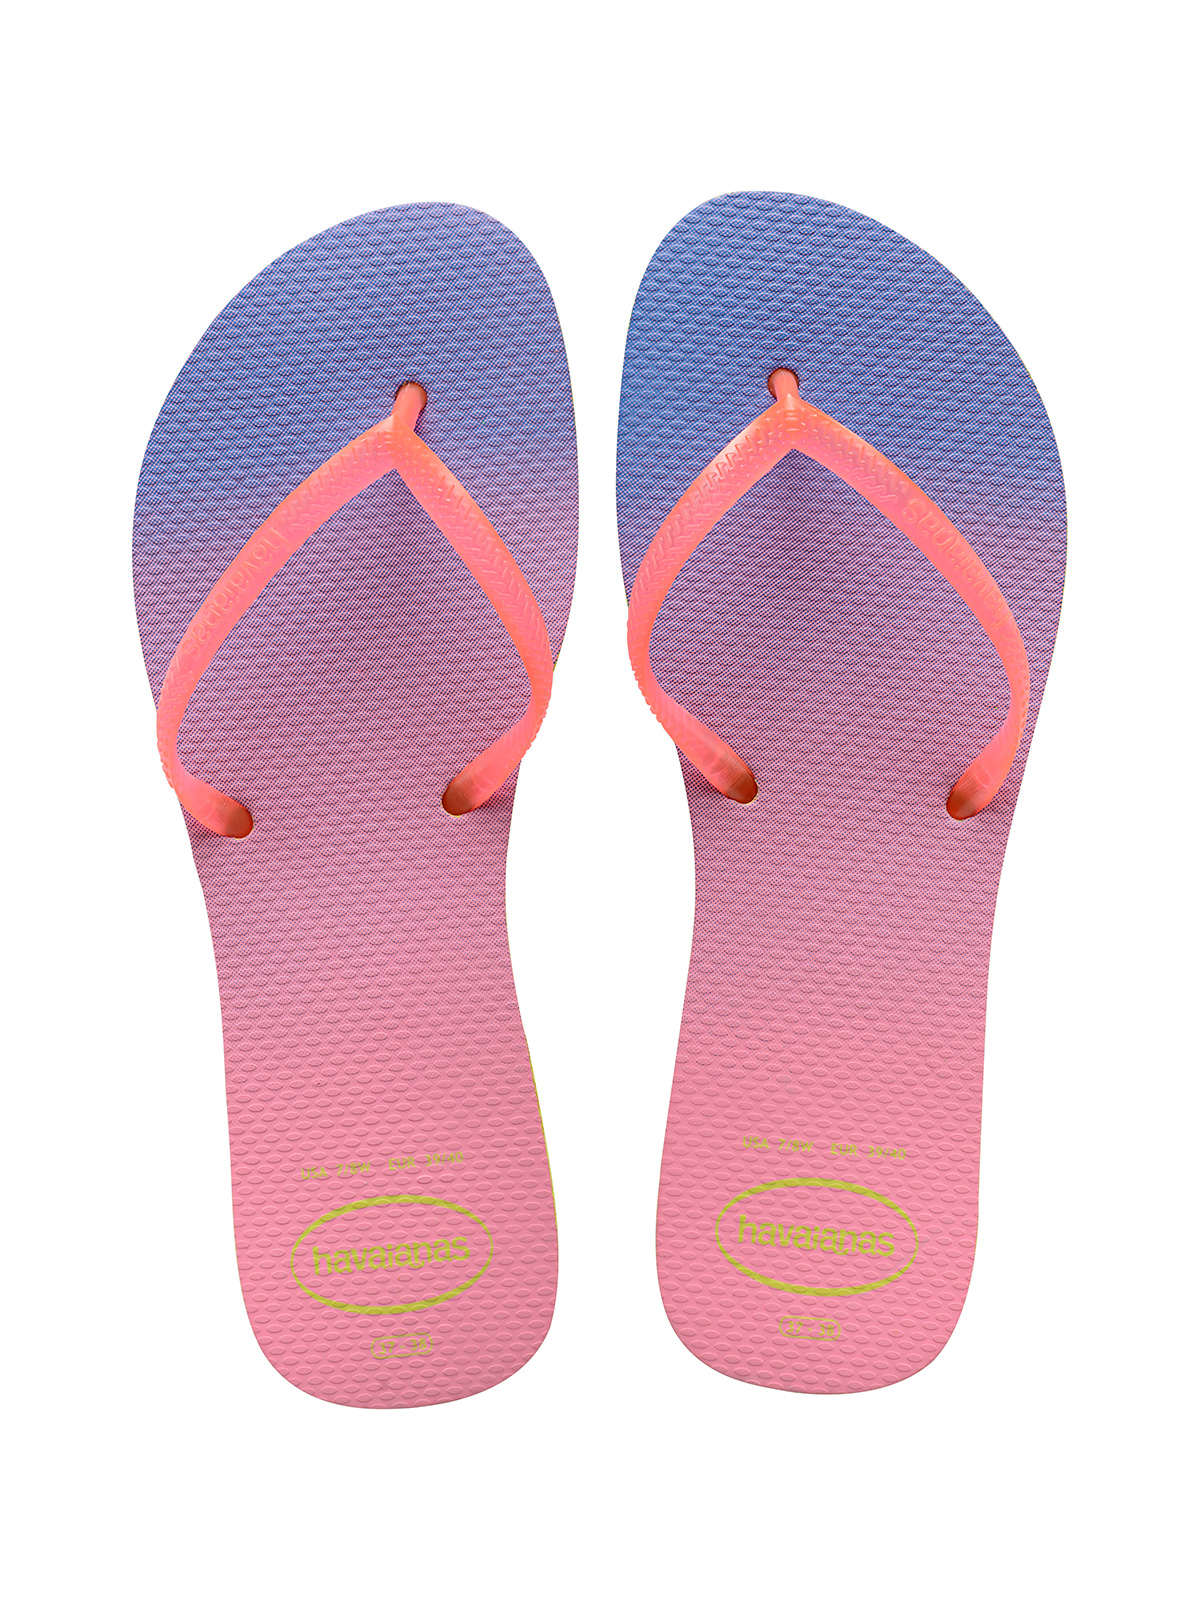 Flip-flops With Short Straps, Shades Of Pink - Flat Sunset Lime Green ...